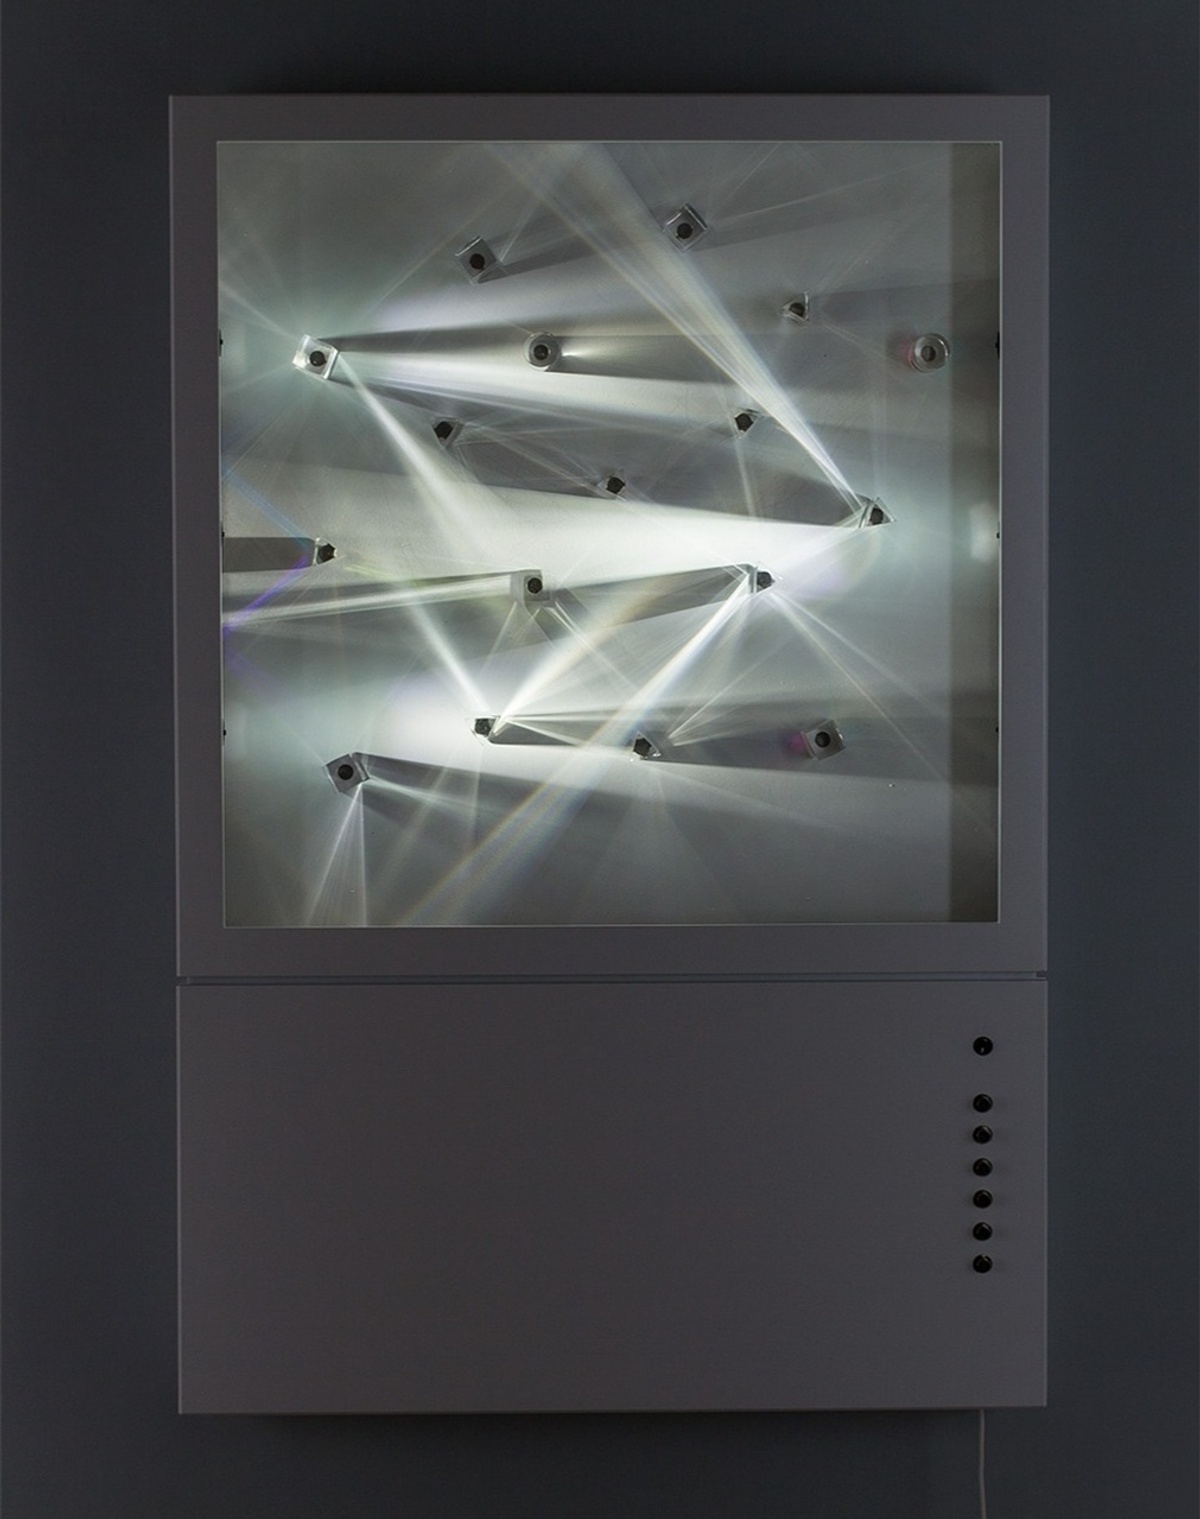 A rectangular device containing a blank "canvas", transparent prisms and one light that emits from several points in the frame, creating interesting visual pattern of light interaction